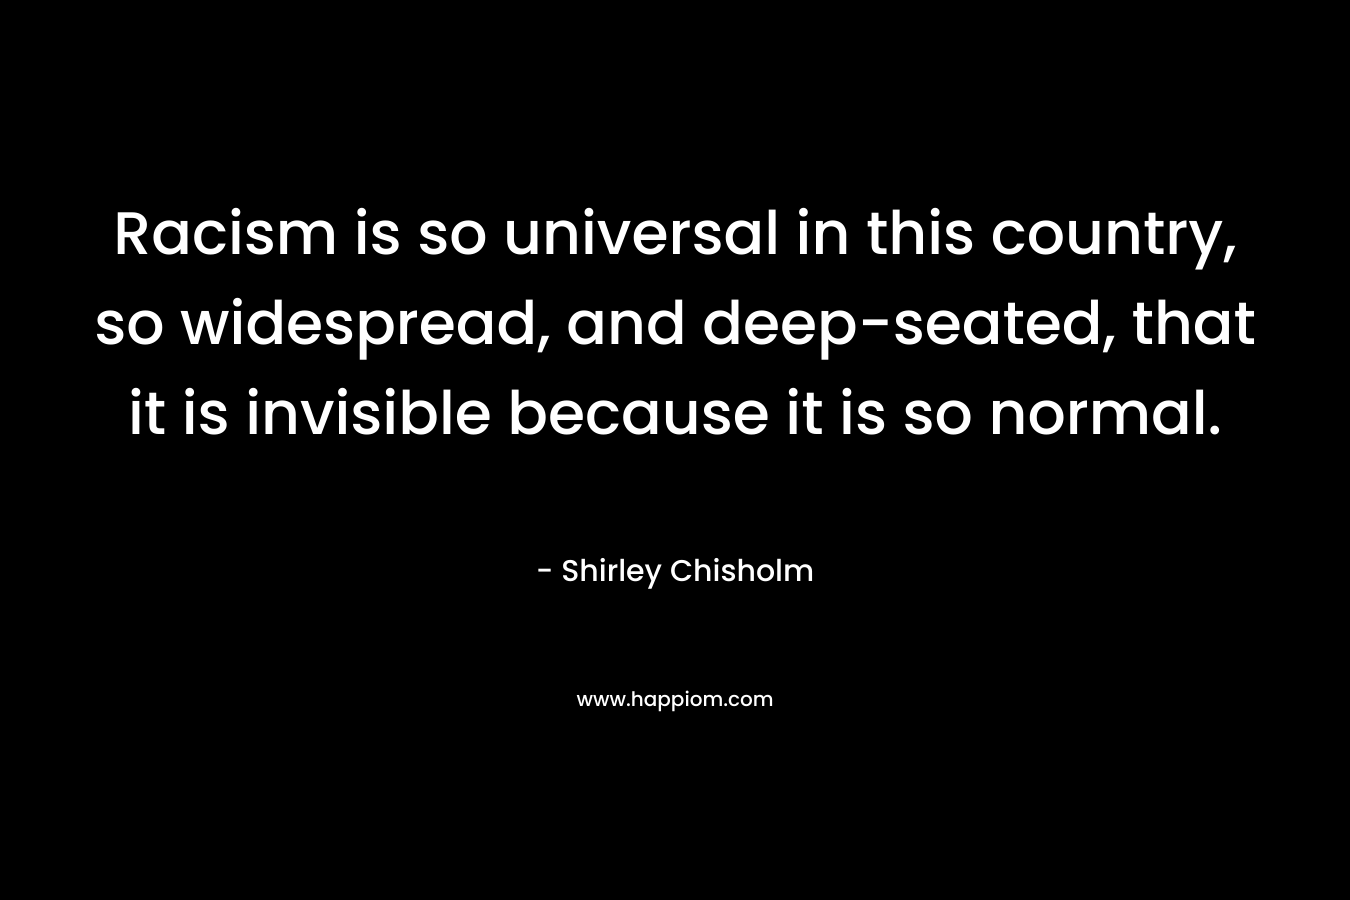 Racism is so universal in this country, so widespread, and deep-seated, that it is invisible because it is so normal.